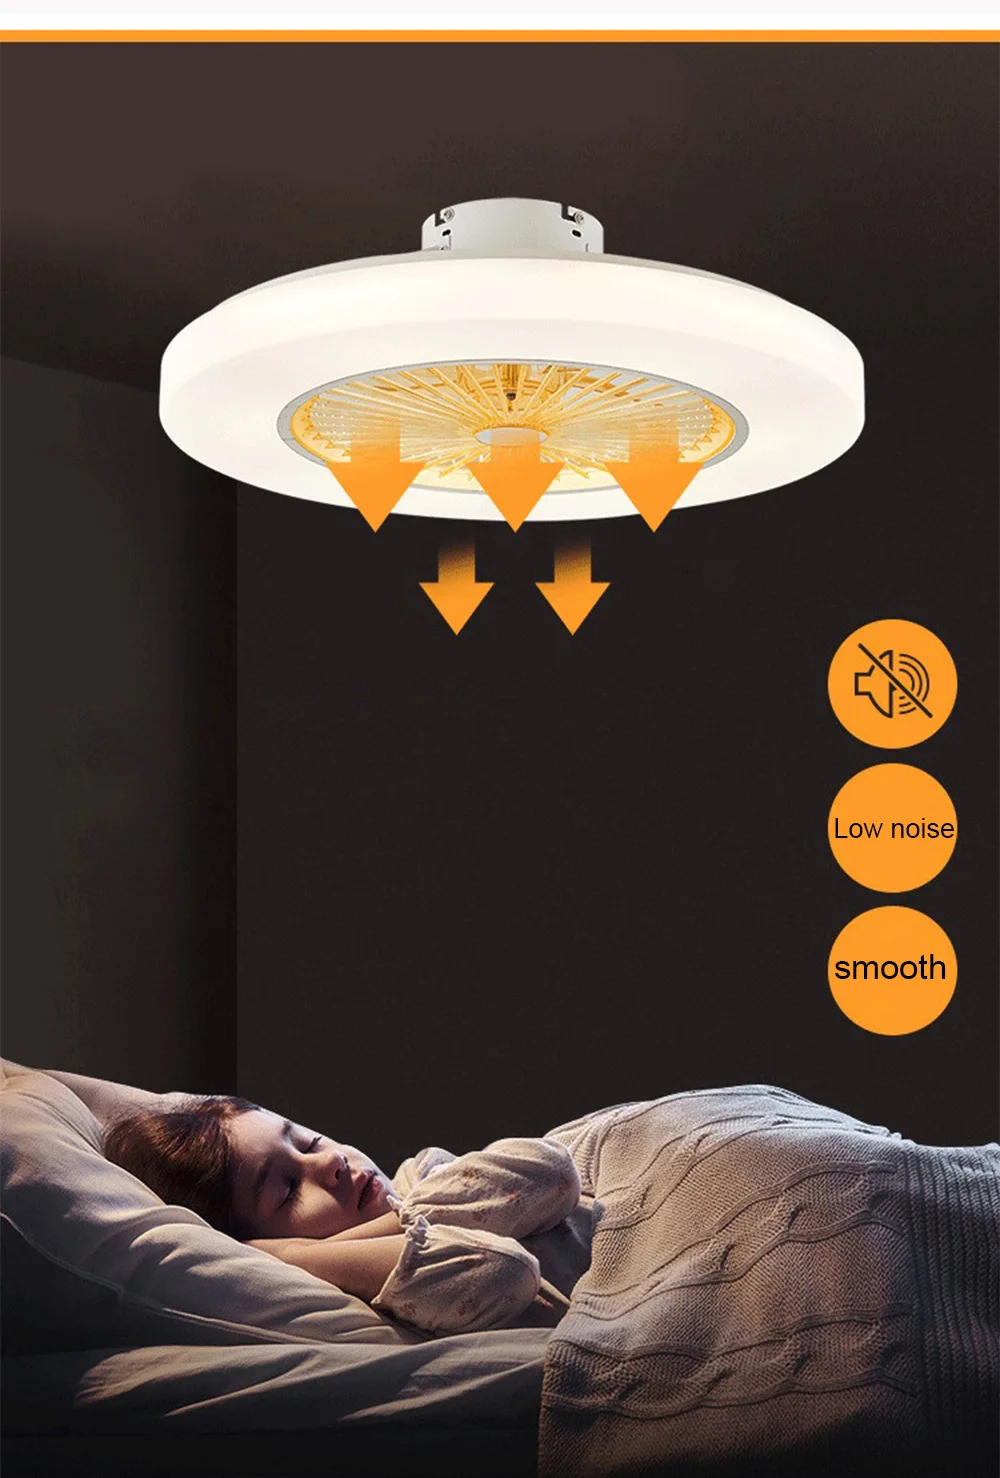 220v/110v 72W LED dimming remote control ceiling Fans lamp Invisible Leaves 58cm Modern simple home decoration Luminaire